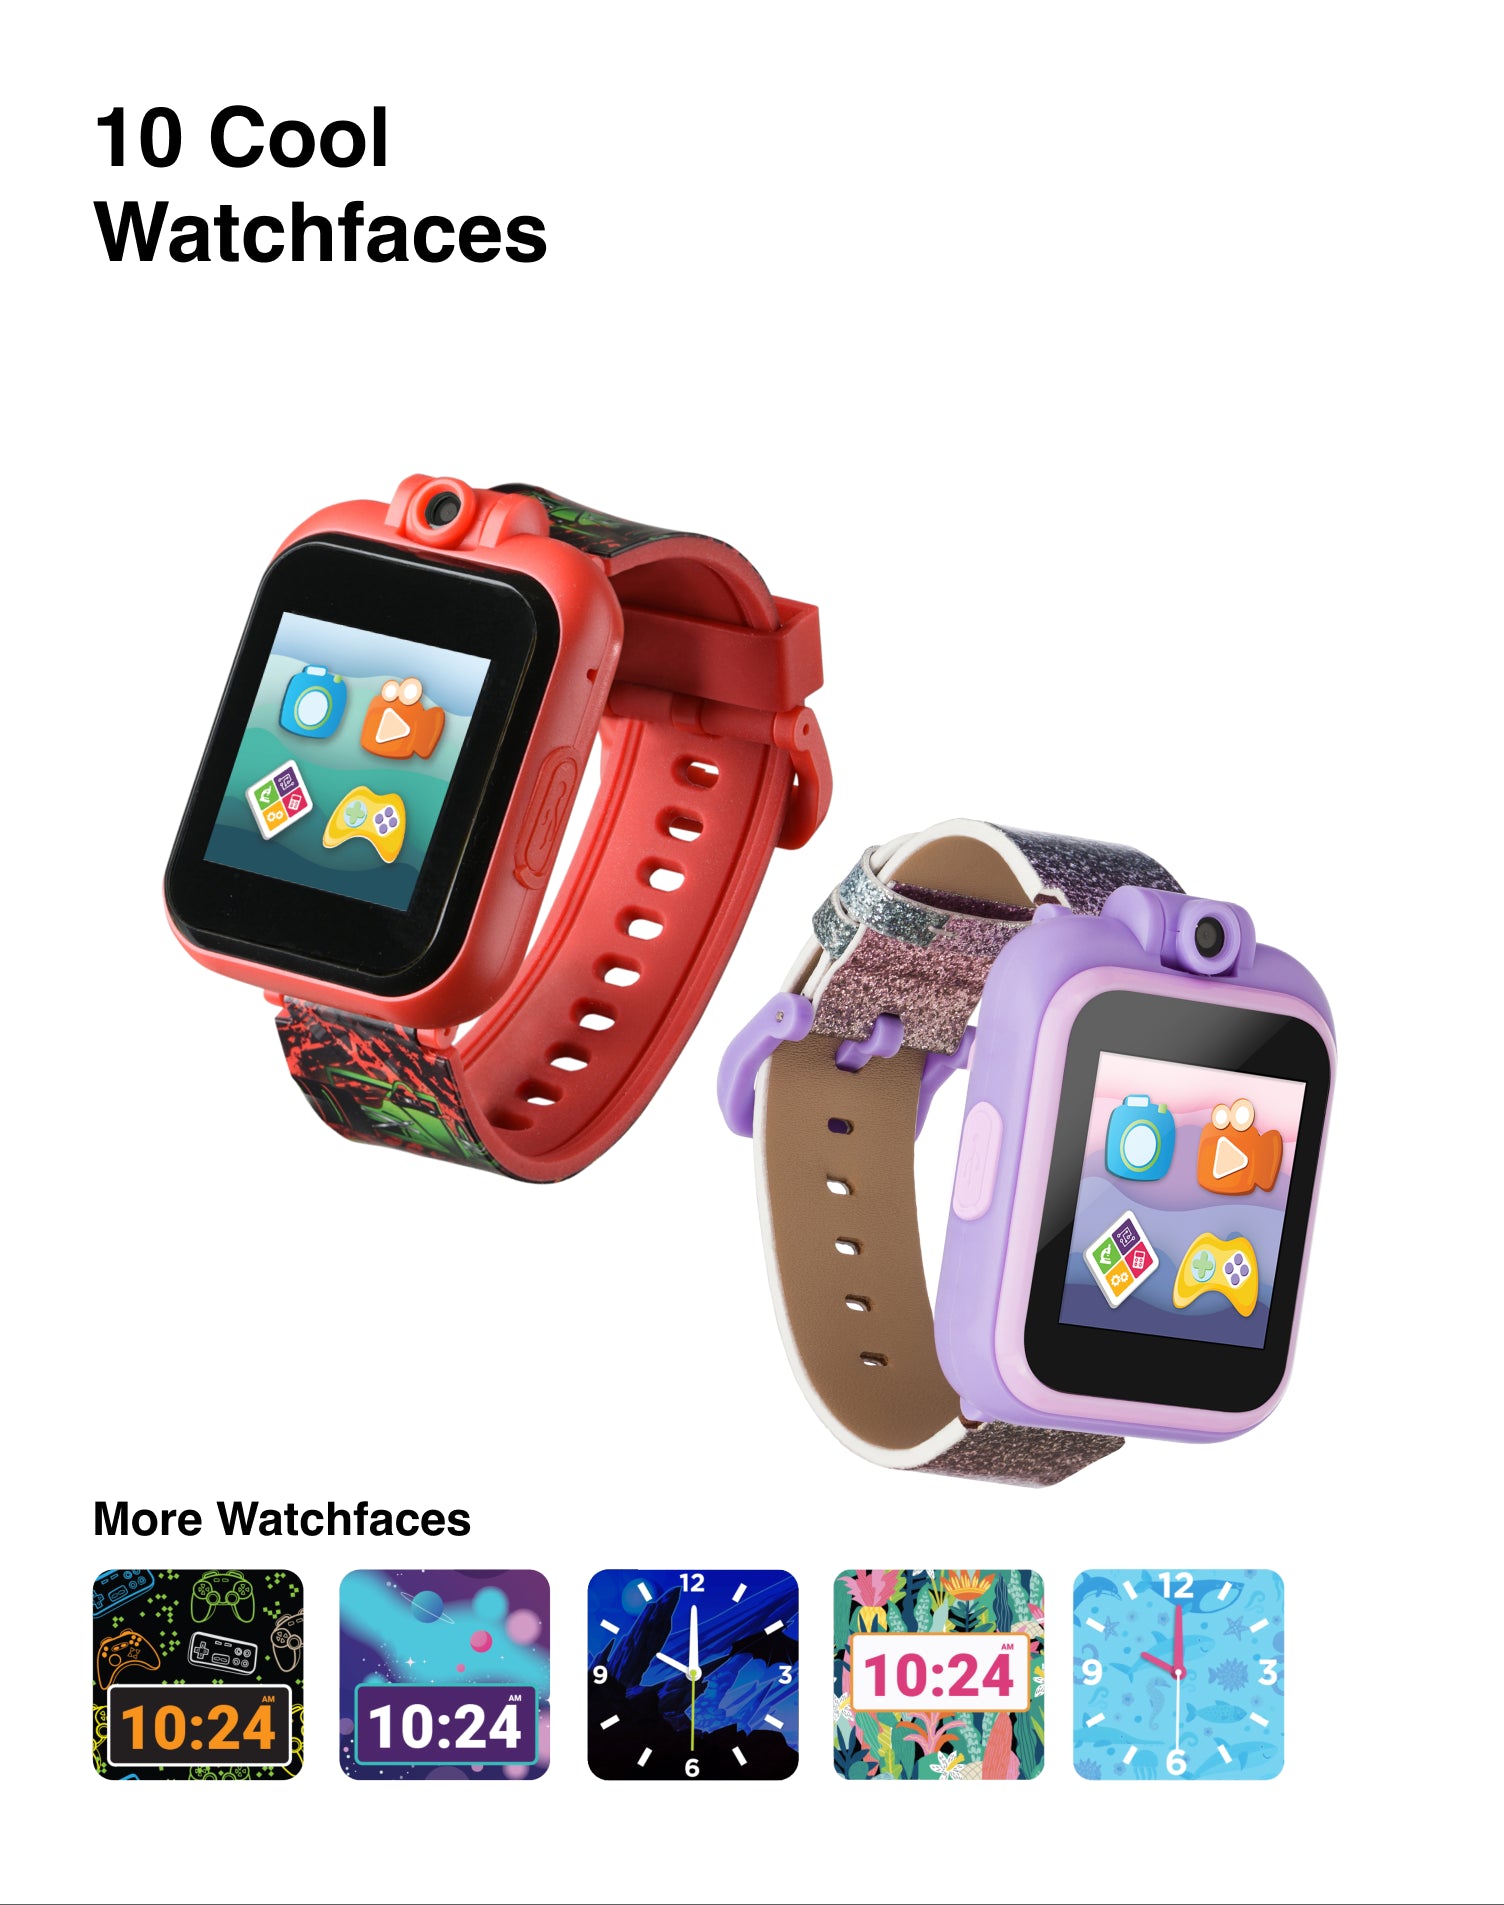 A very affordable smart watch